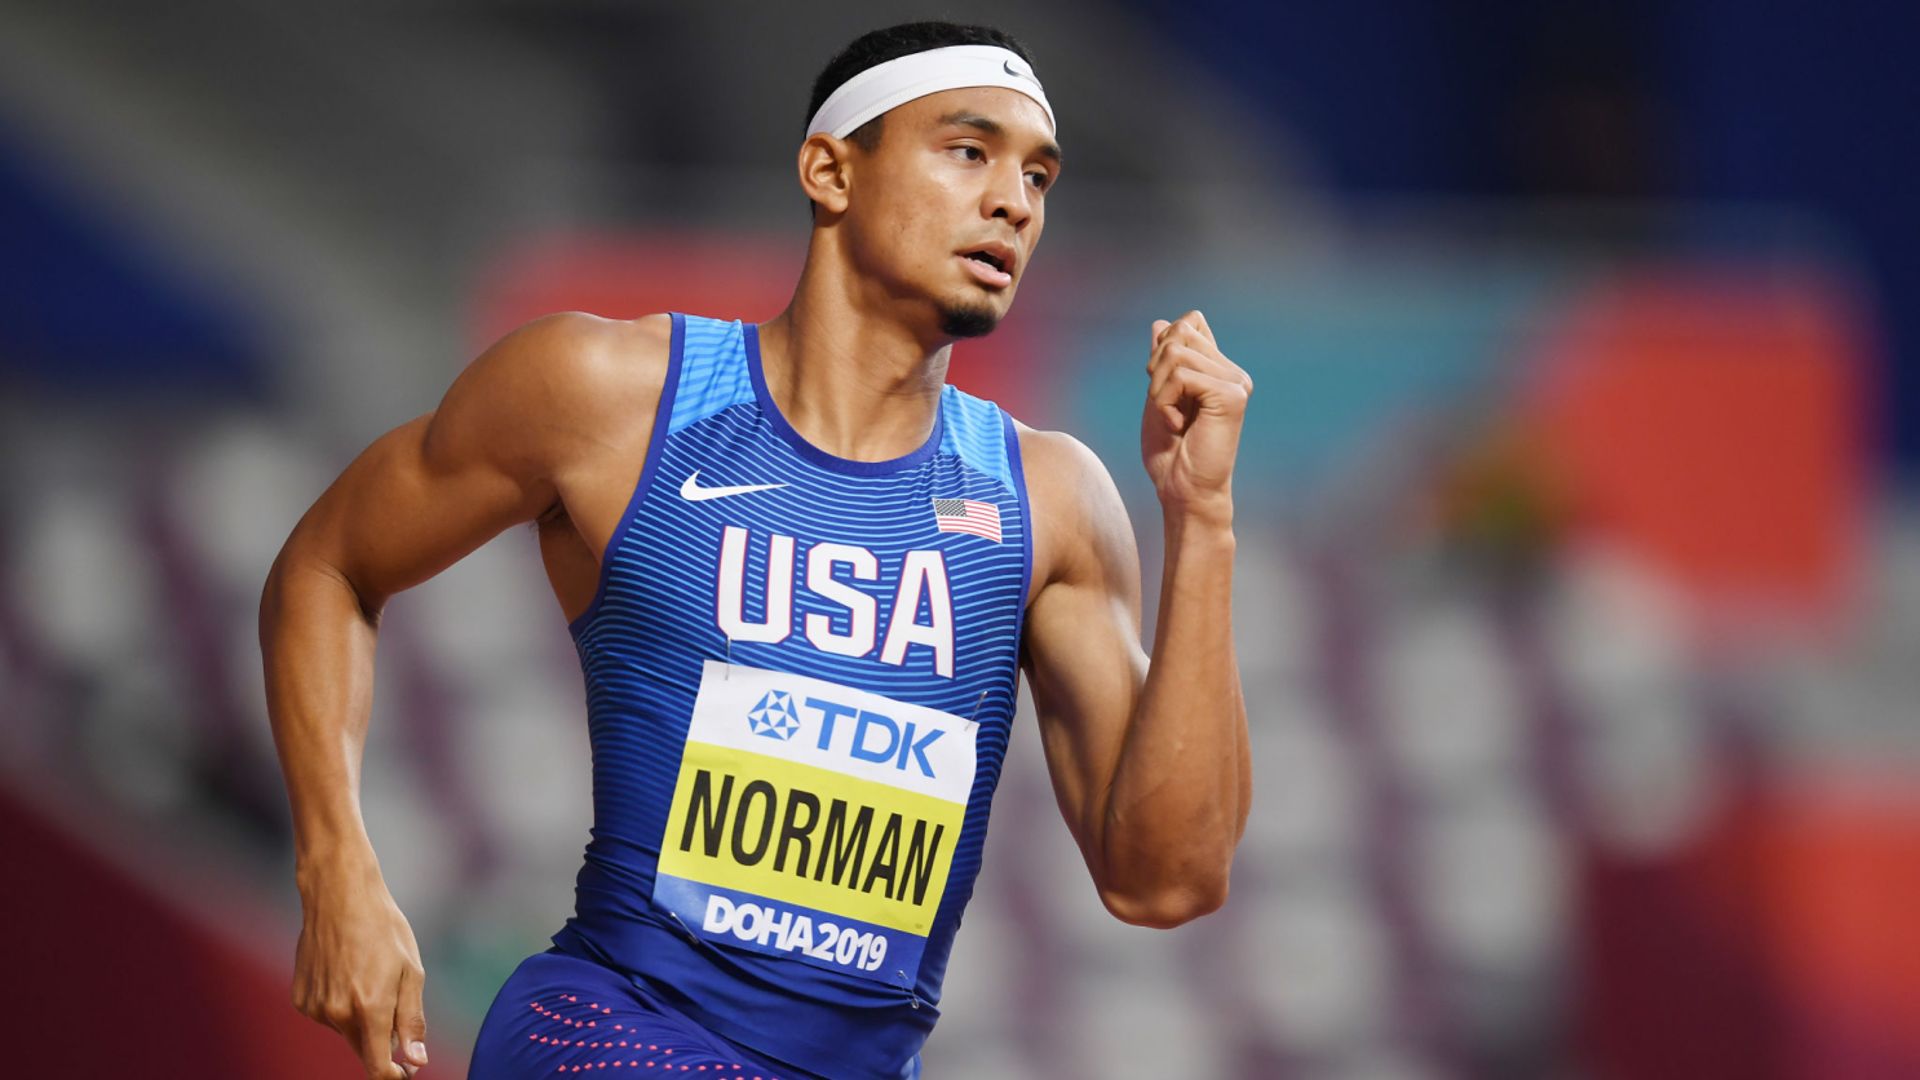 Michael Norman in action during World Championships Doha 2019 (Image Credits - USATF)